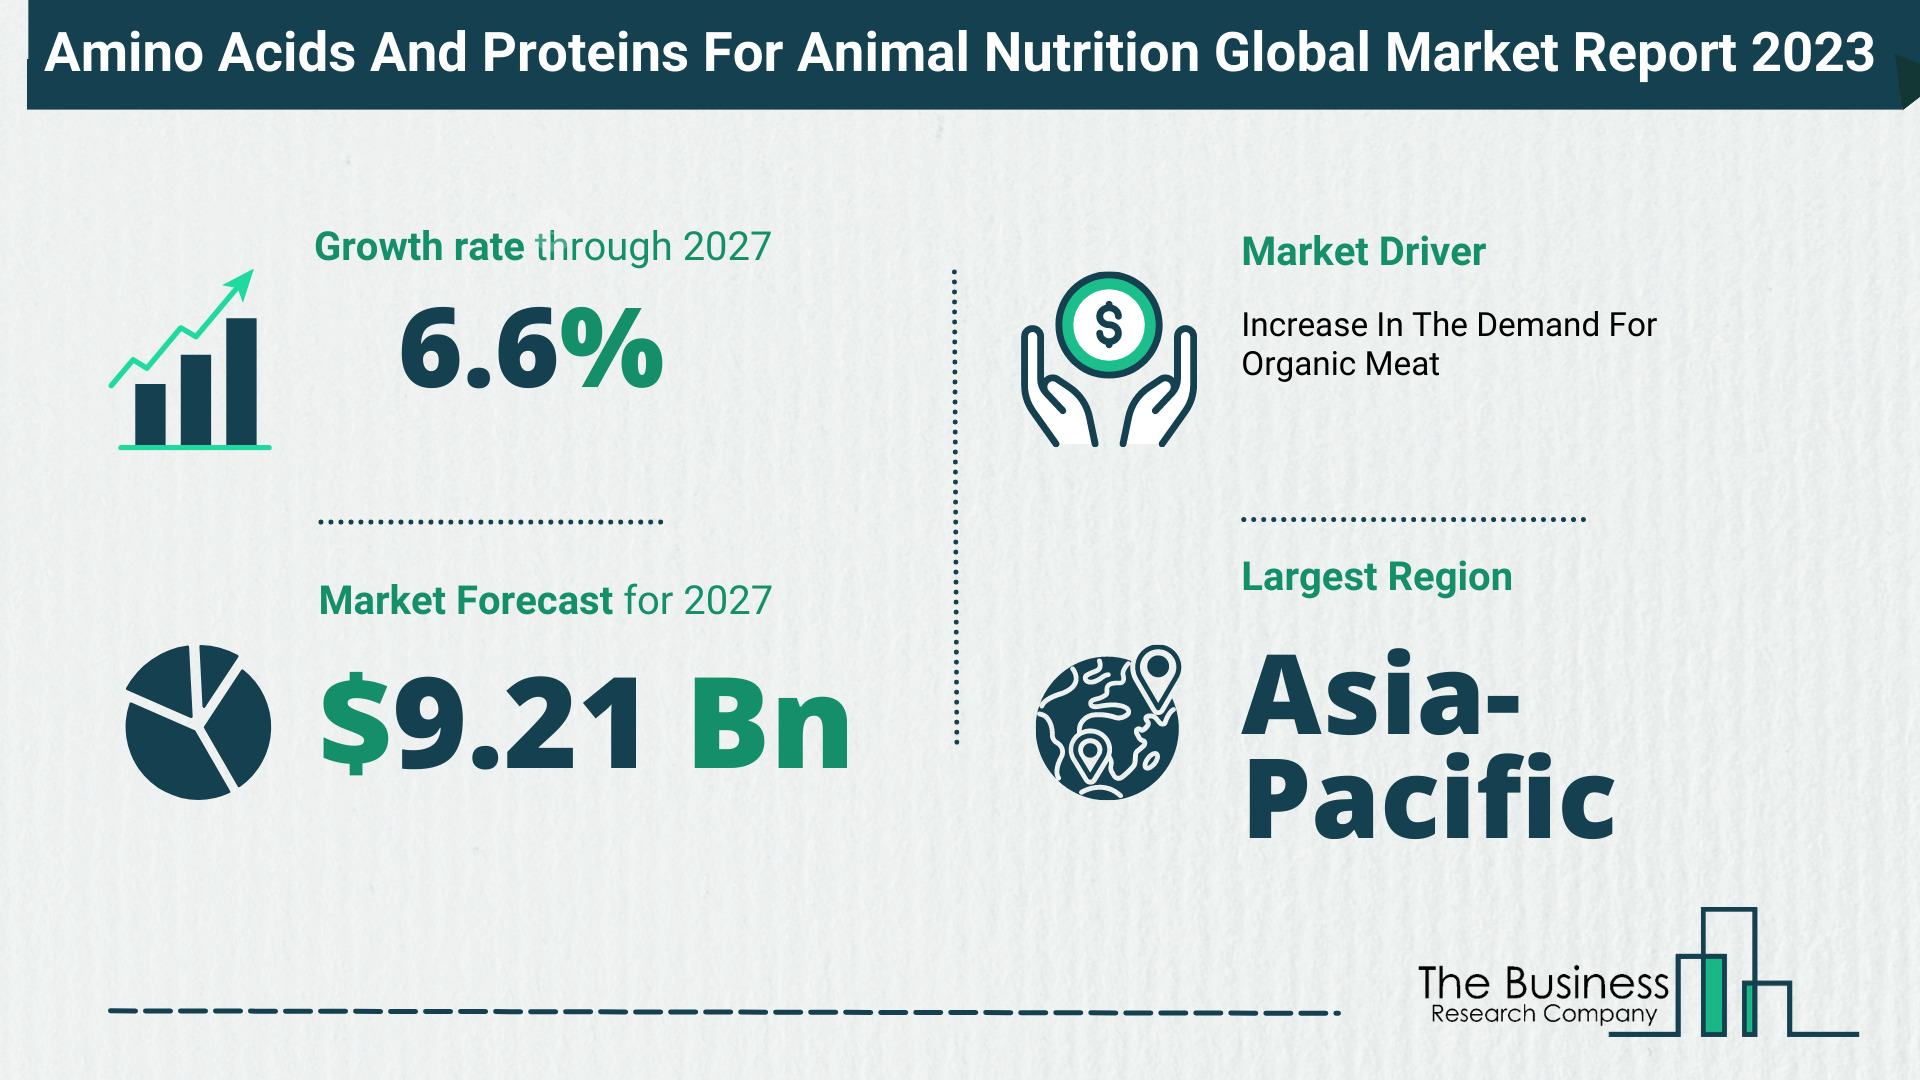 How Will The Amino Acids And Proteins For Animal Nutrition Market Globally Expand In 2023?